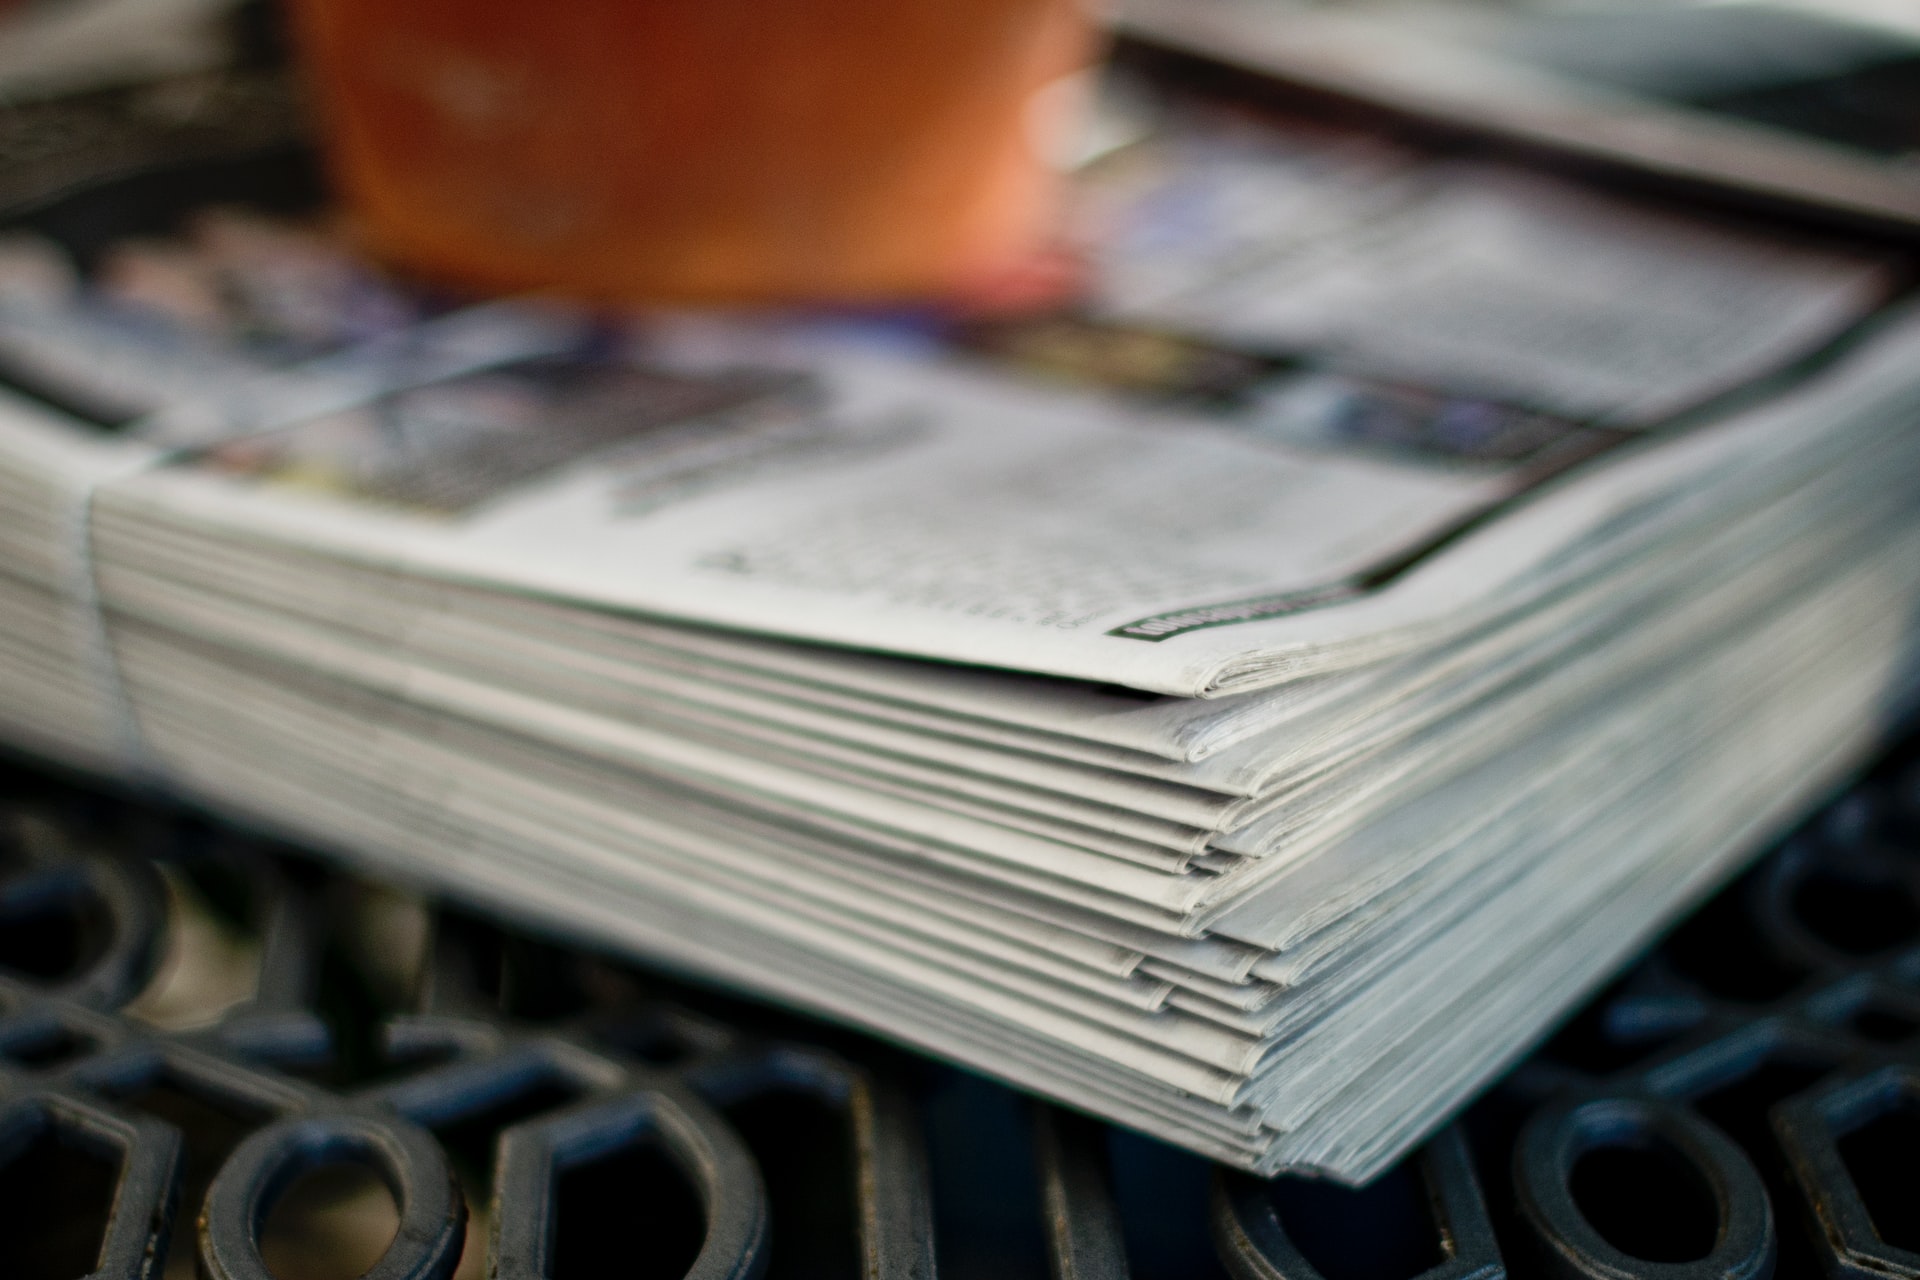 A phot of a stack of newspapers with an apple on top.